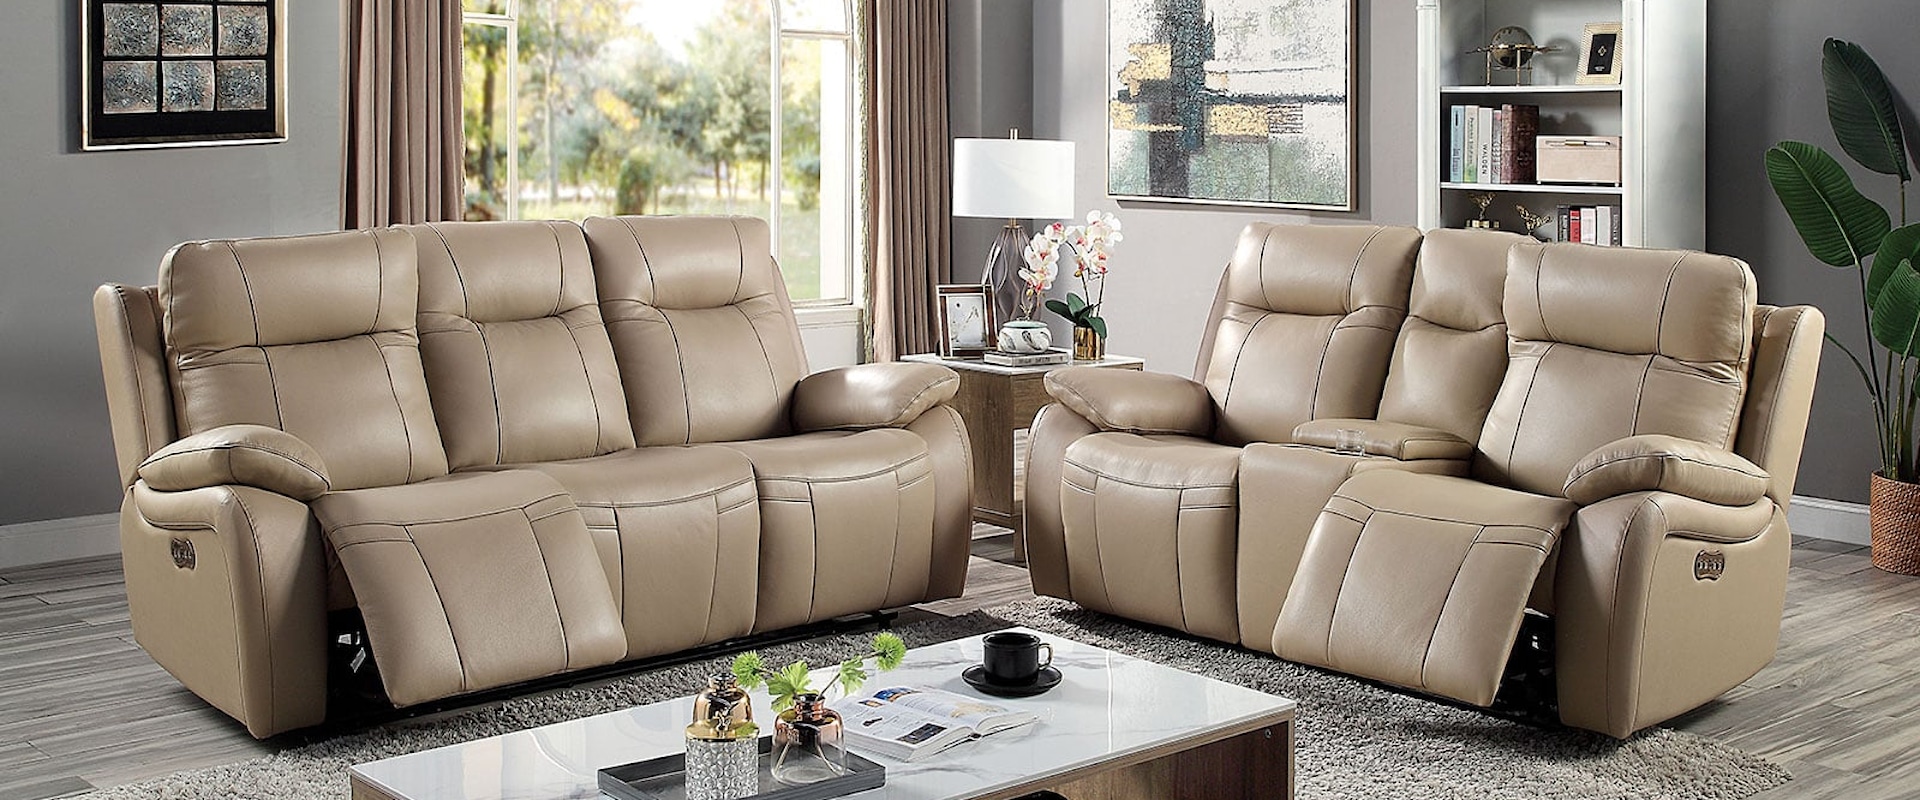 Transitional Power Loveseat and Sofa with USB Port(s) - Light Brown